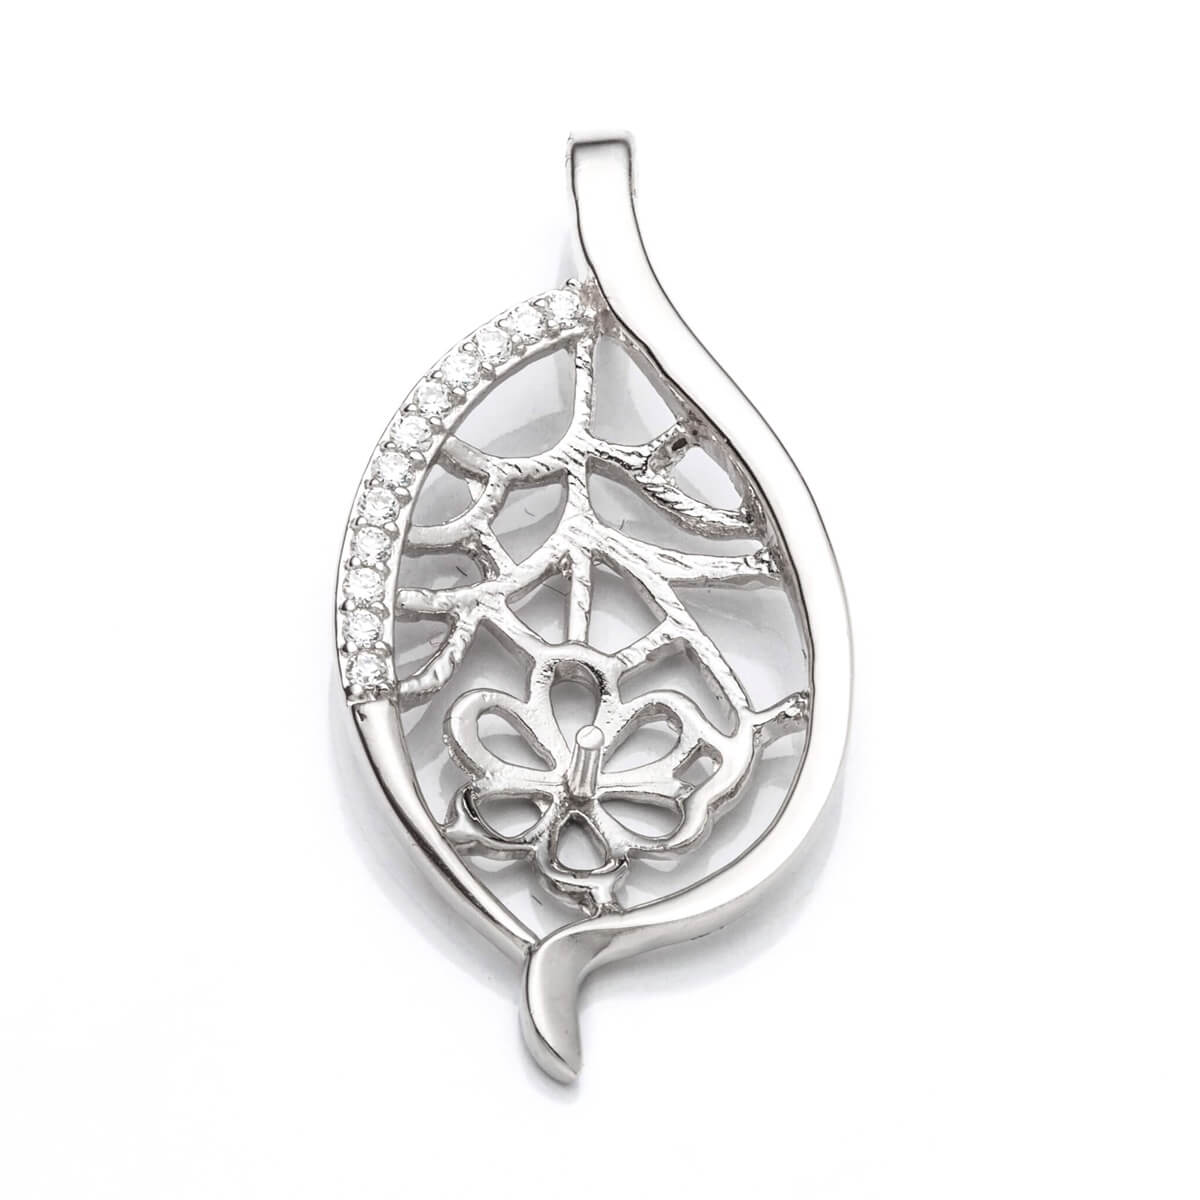 Leaf Pendant with Cubic Zirconia Inlays and Cup and Peg Mounting in Sterling Silver 8mm 